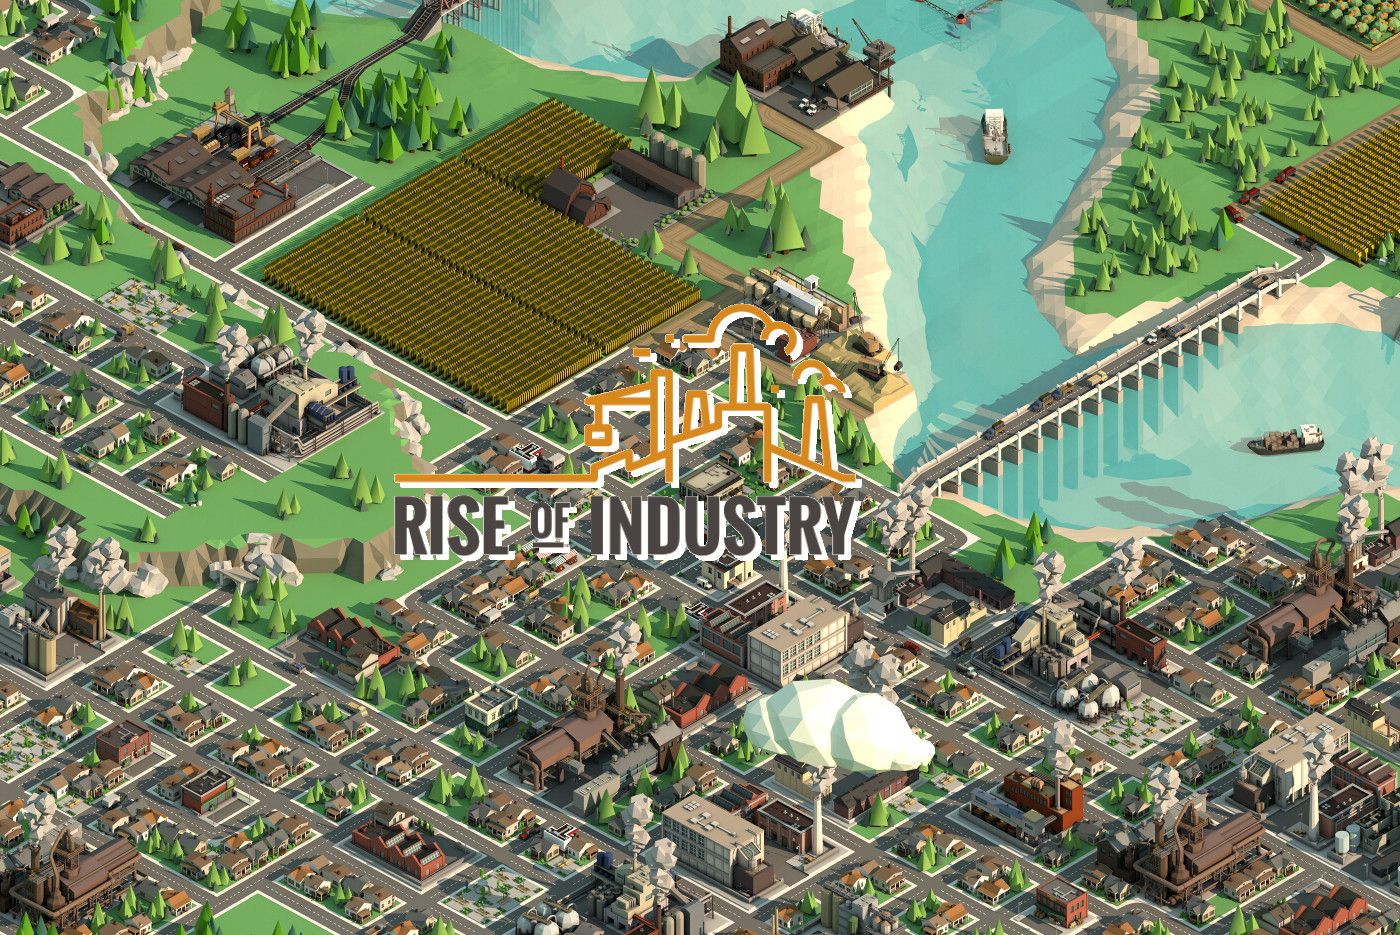 Rise of Industry — producing the ultimate tycoon game